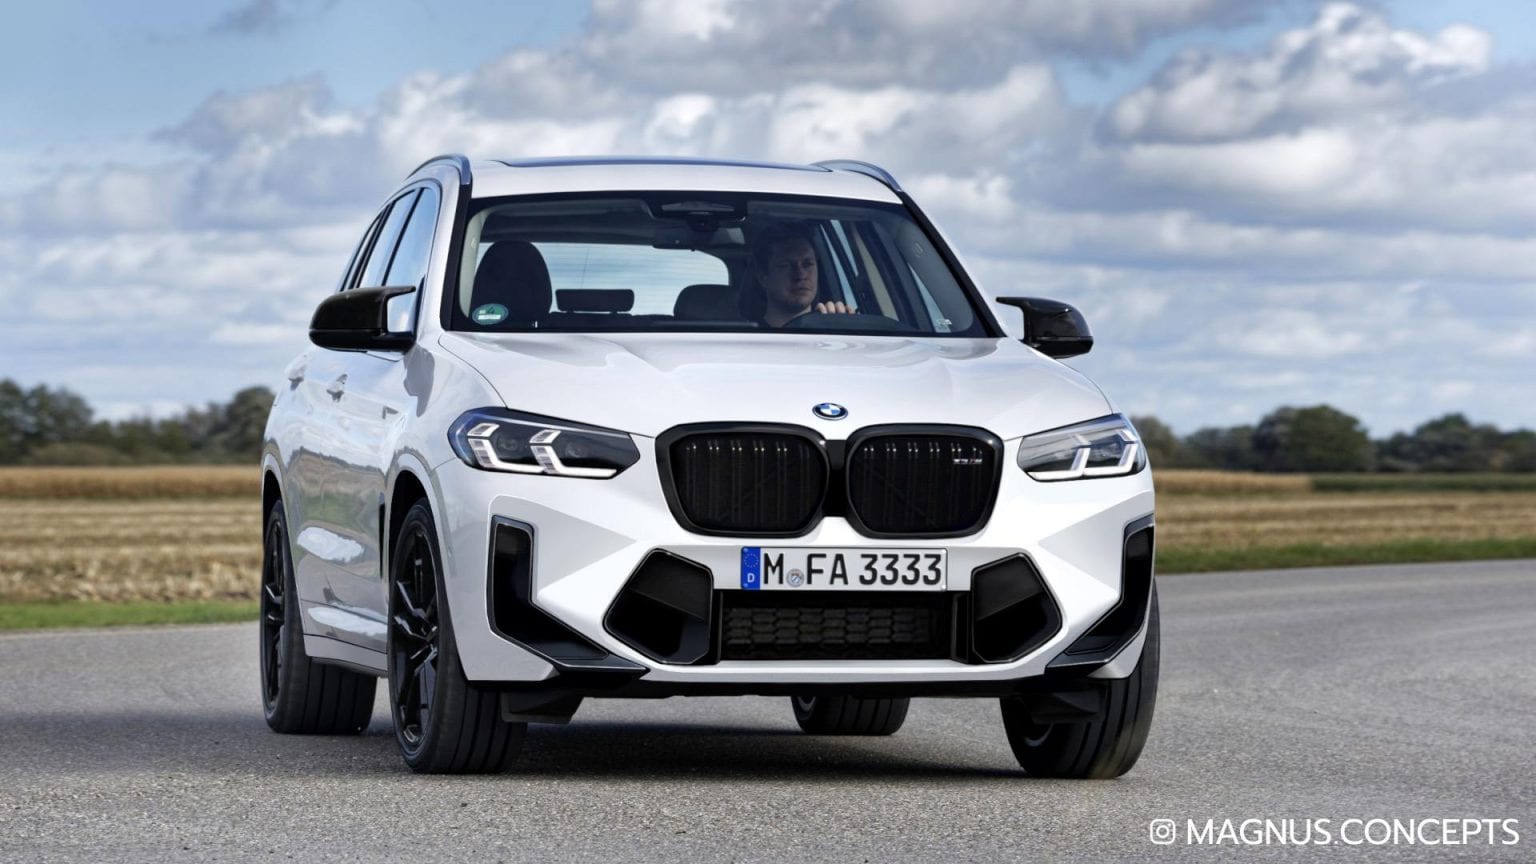 2021 BMW X3 M facelift gets rendered with new grille and front bumper